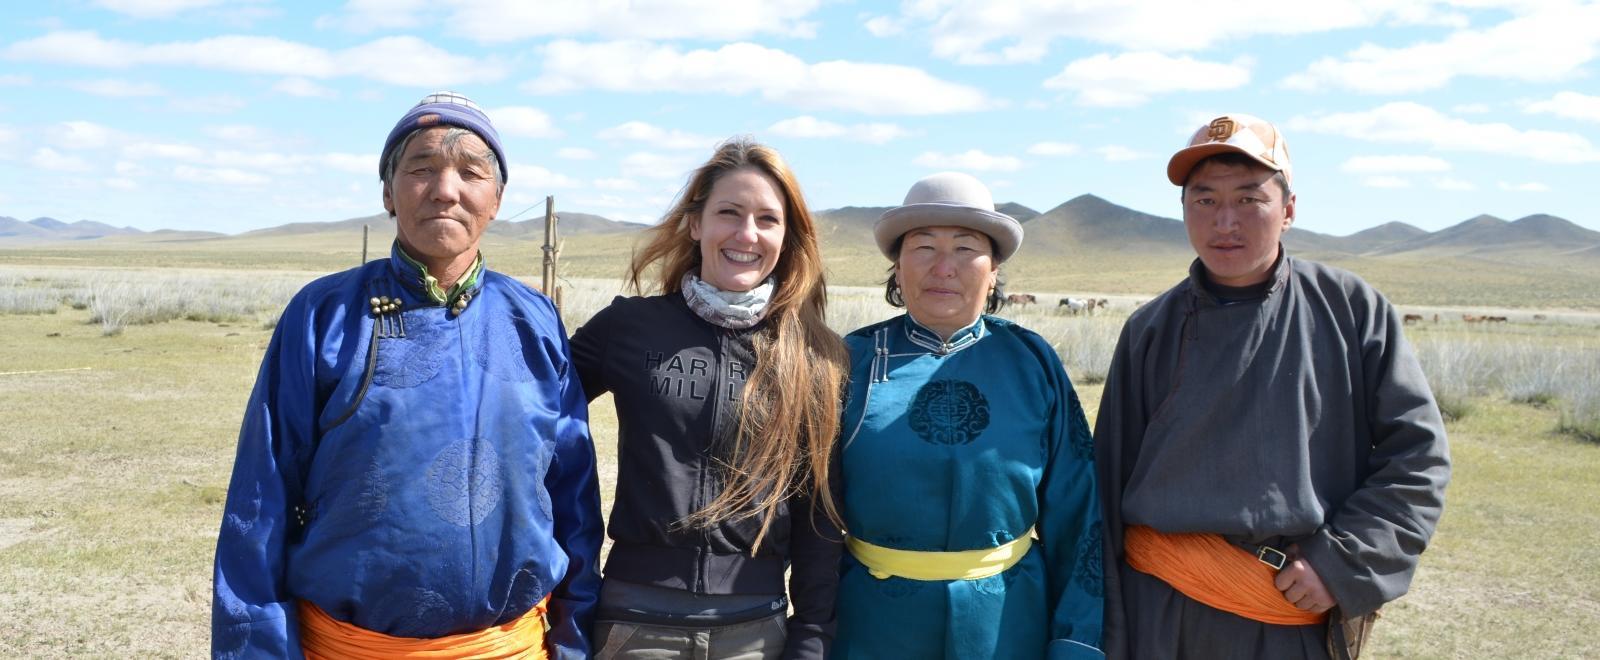 A Projects Abroad volunteer spends time at her host family accommodation while volunteering in Mongolia.